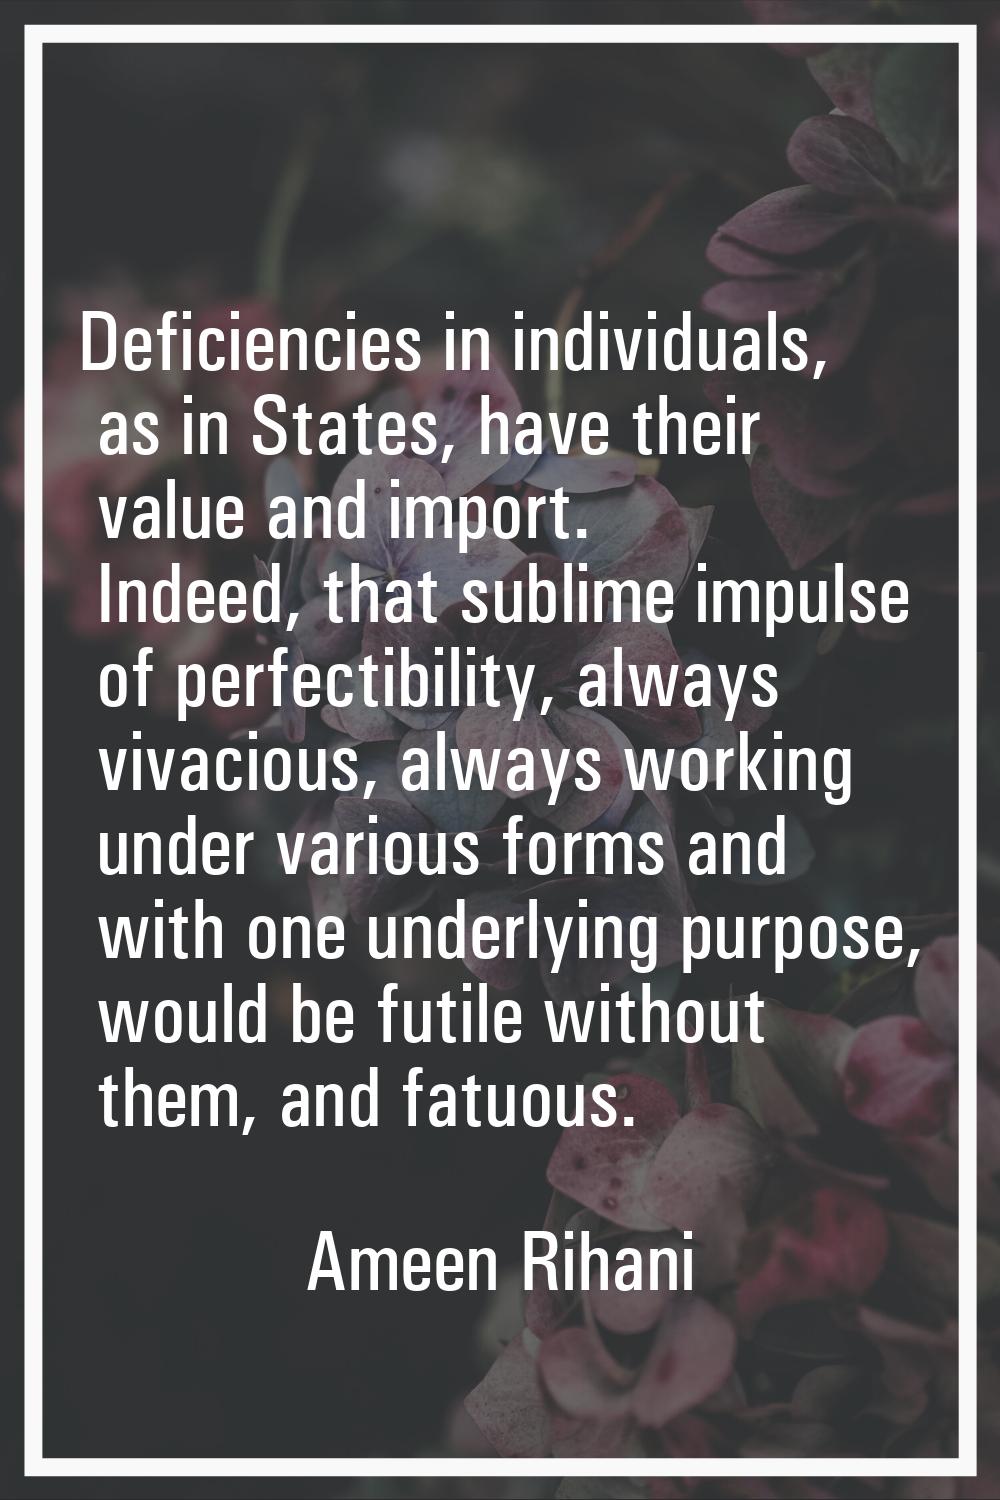 Deficiencies in individuals, as in States, have their value and import. Indeed, that sublime impuls